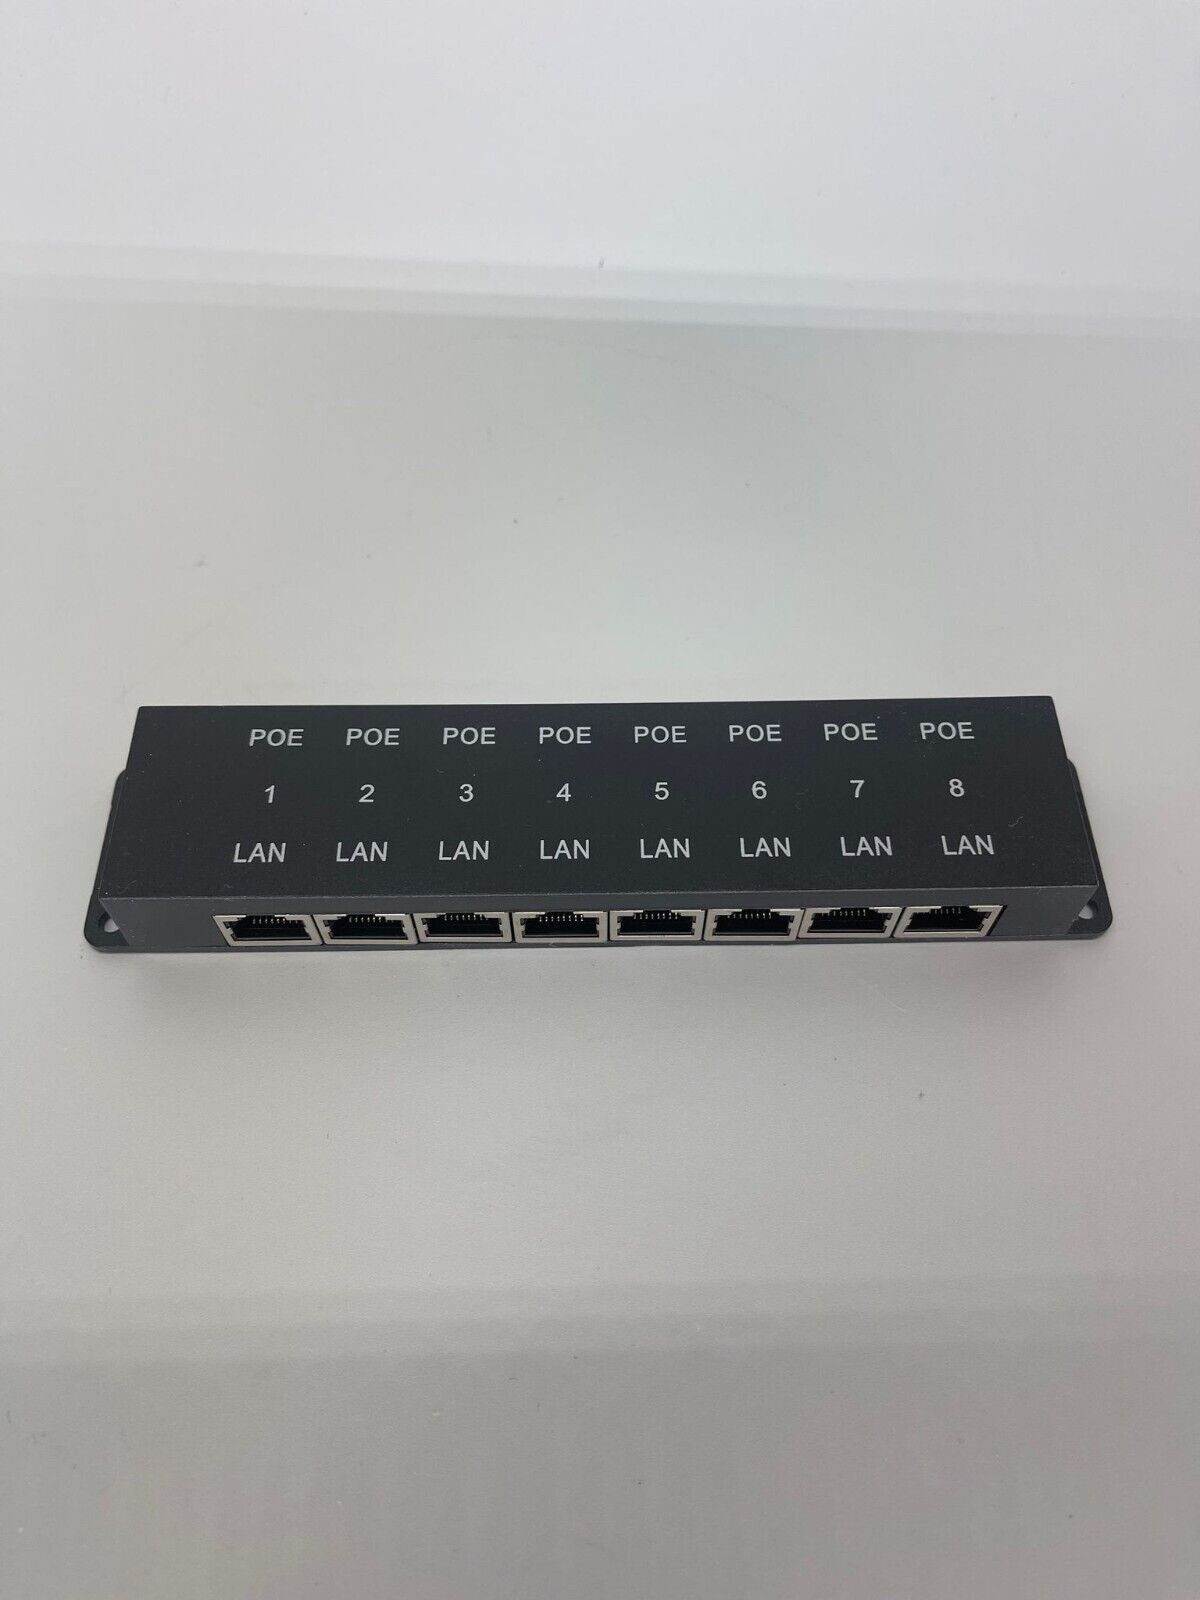 PoE Texas POE-8 | 8 Port PoE Injector for Power and Data to 8 Devices- Only Unit